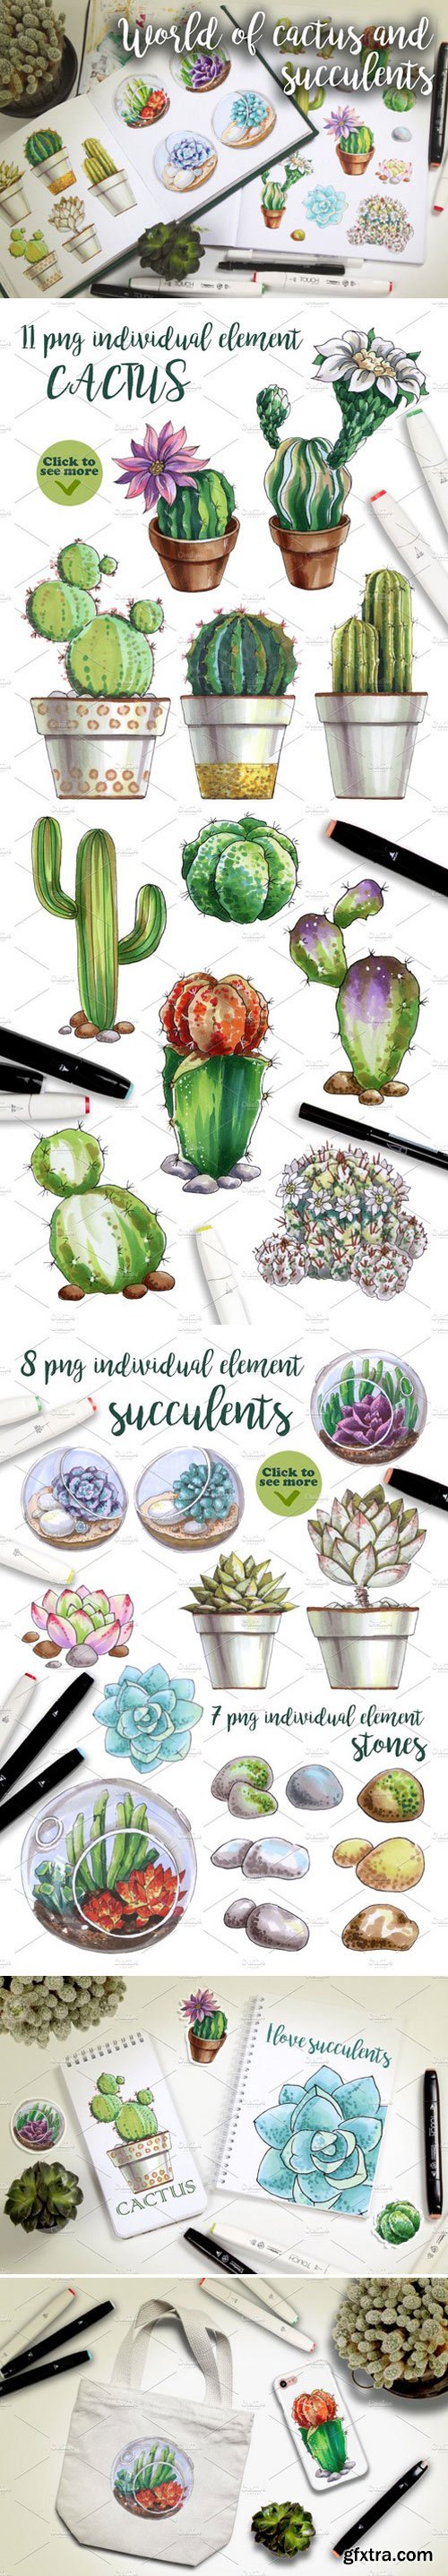 CM - World of cactus and succulents 2231329